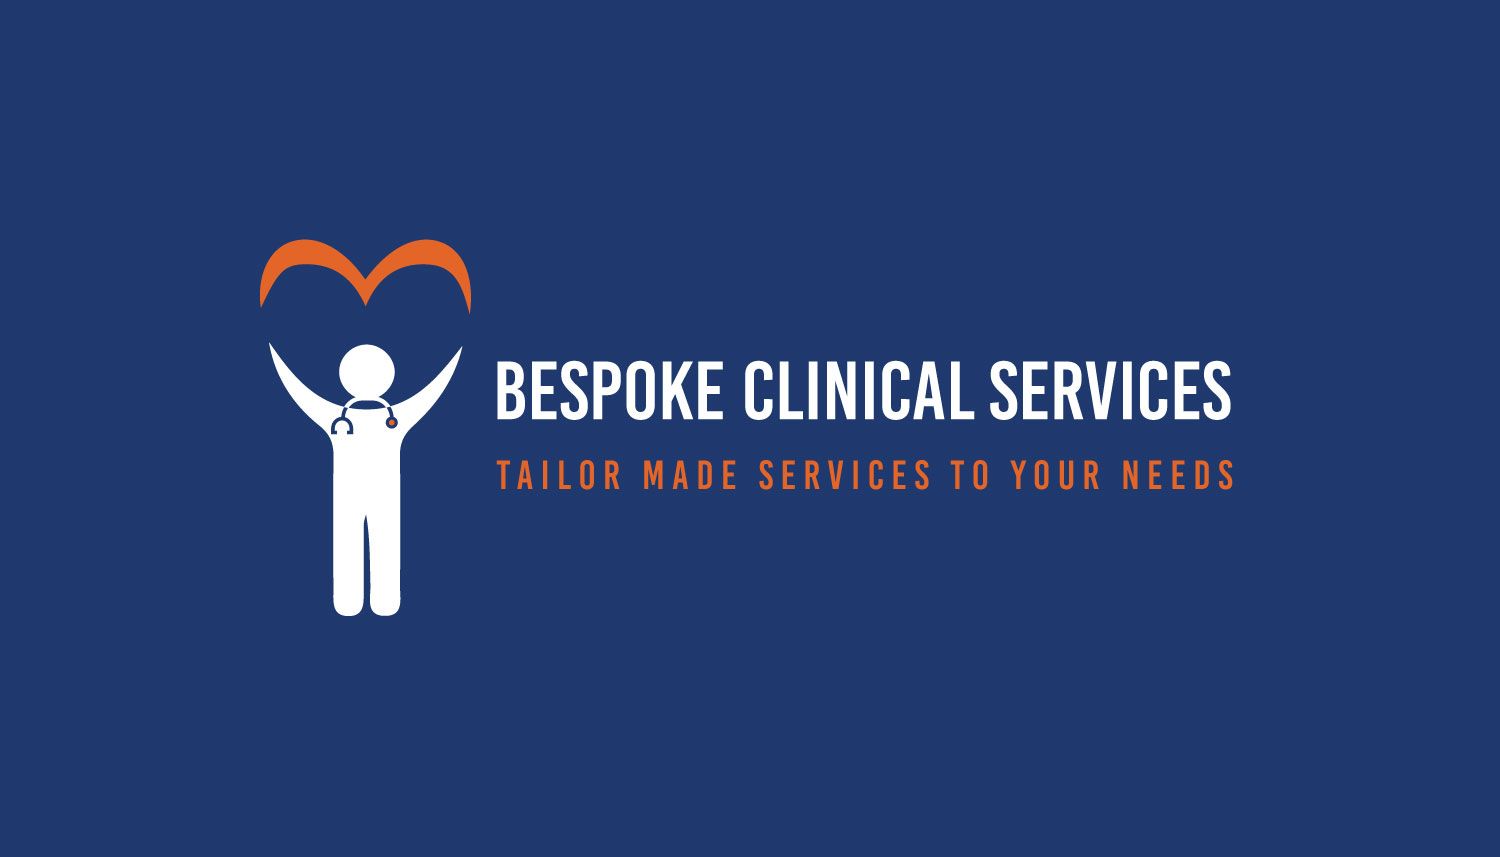 Bespoke clinical services